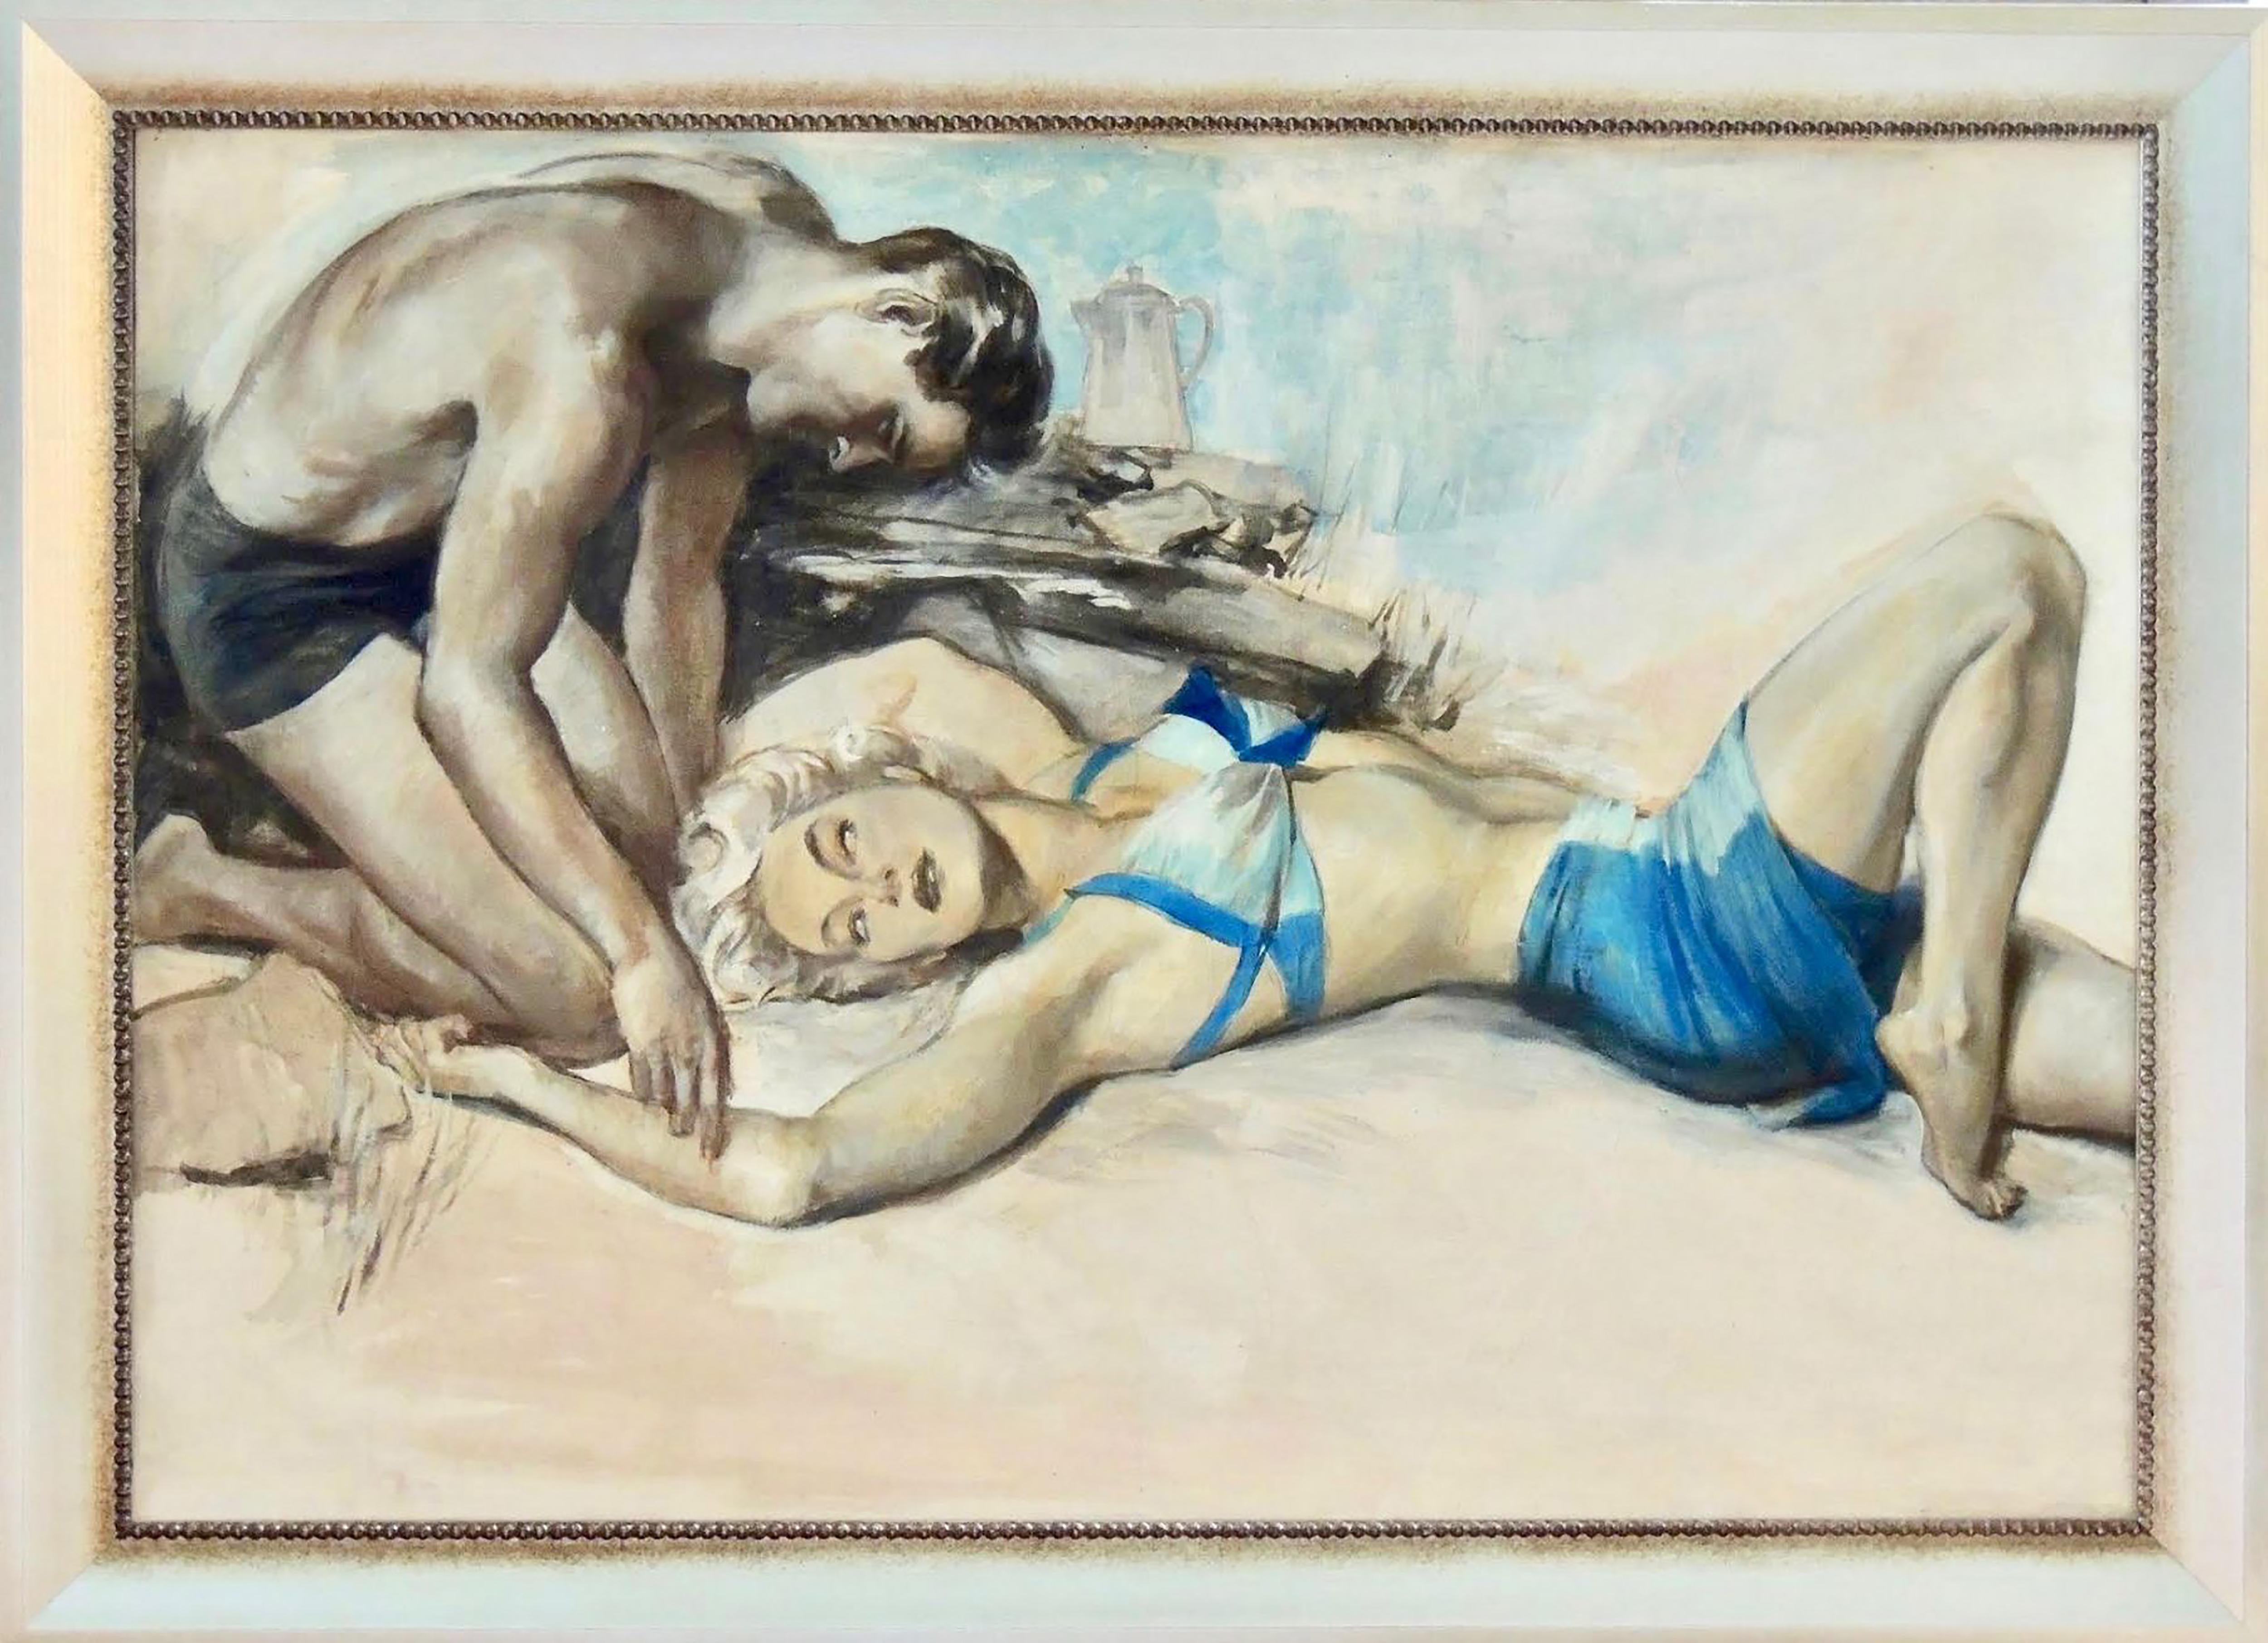 Woman in Blue Two-Piece Bathing Suit Laying on Beach with Man in Bathing Su - Painting by John Lagatta